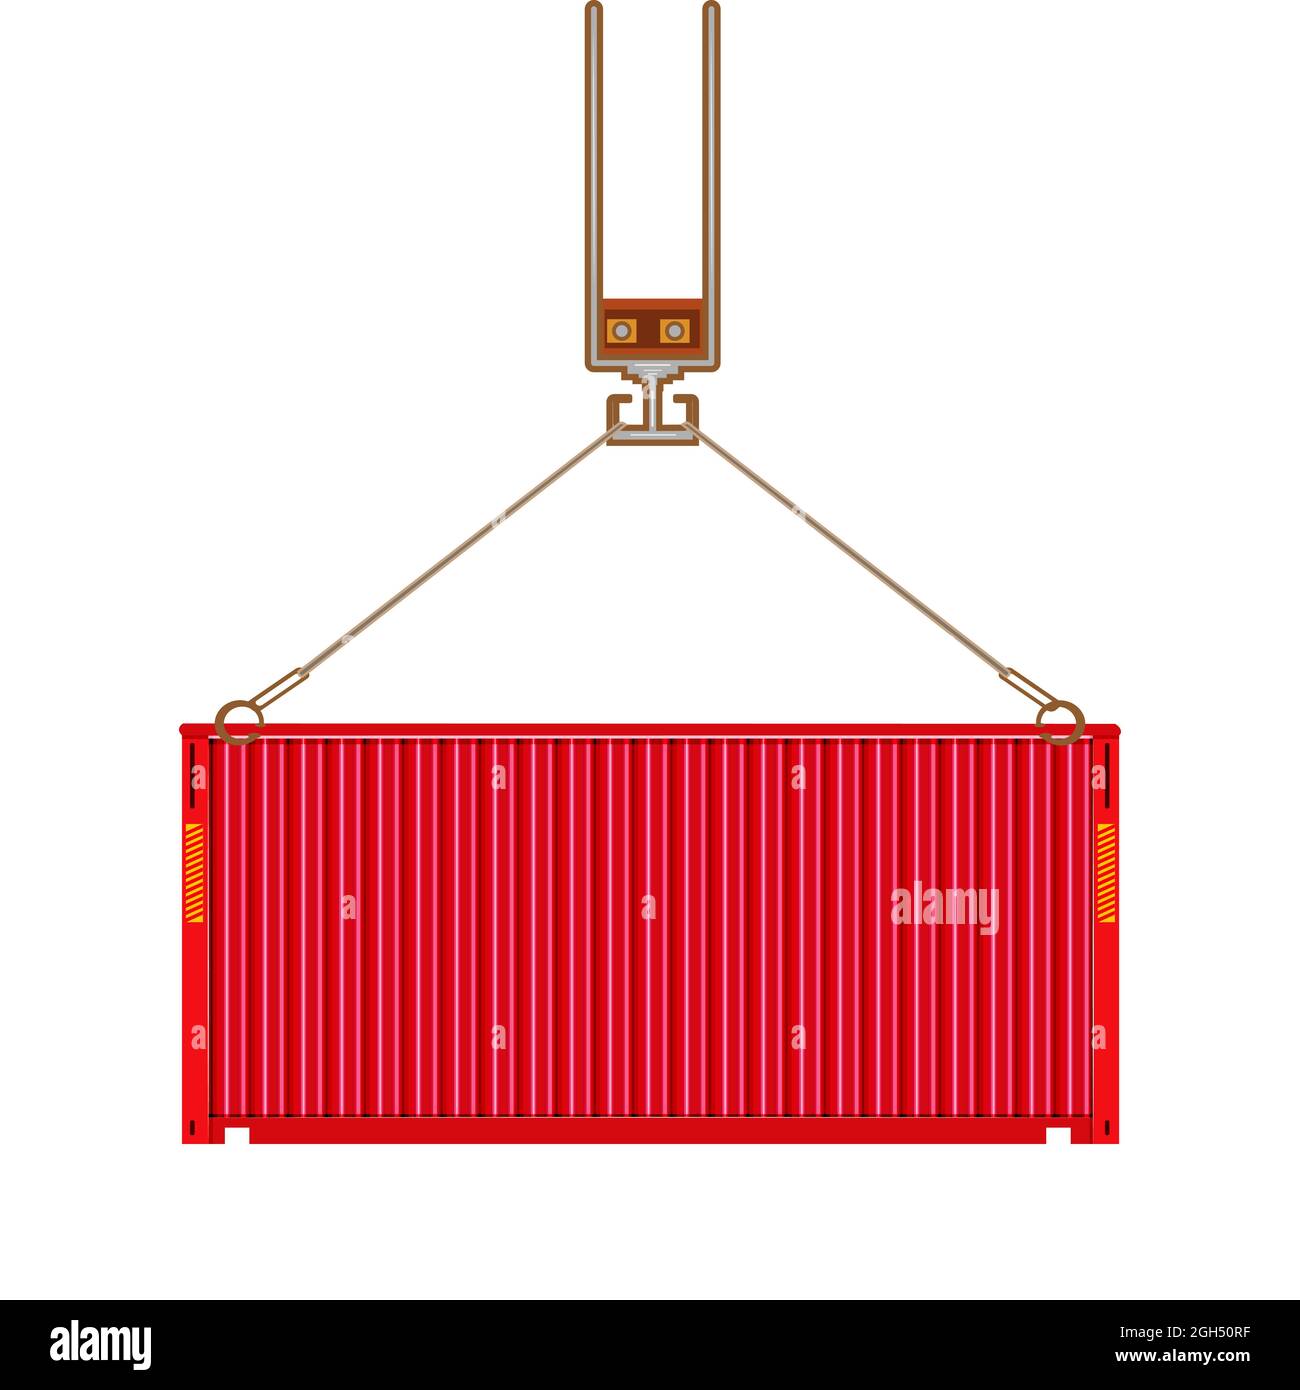 Freight shipping container hanging on crane hook isolated on white background. Port crane lifts  cargo red container. Front view. Vector illustration Stock Vector